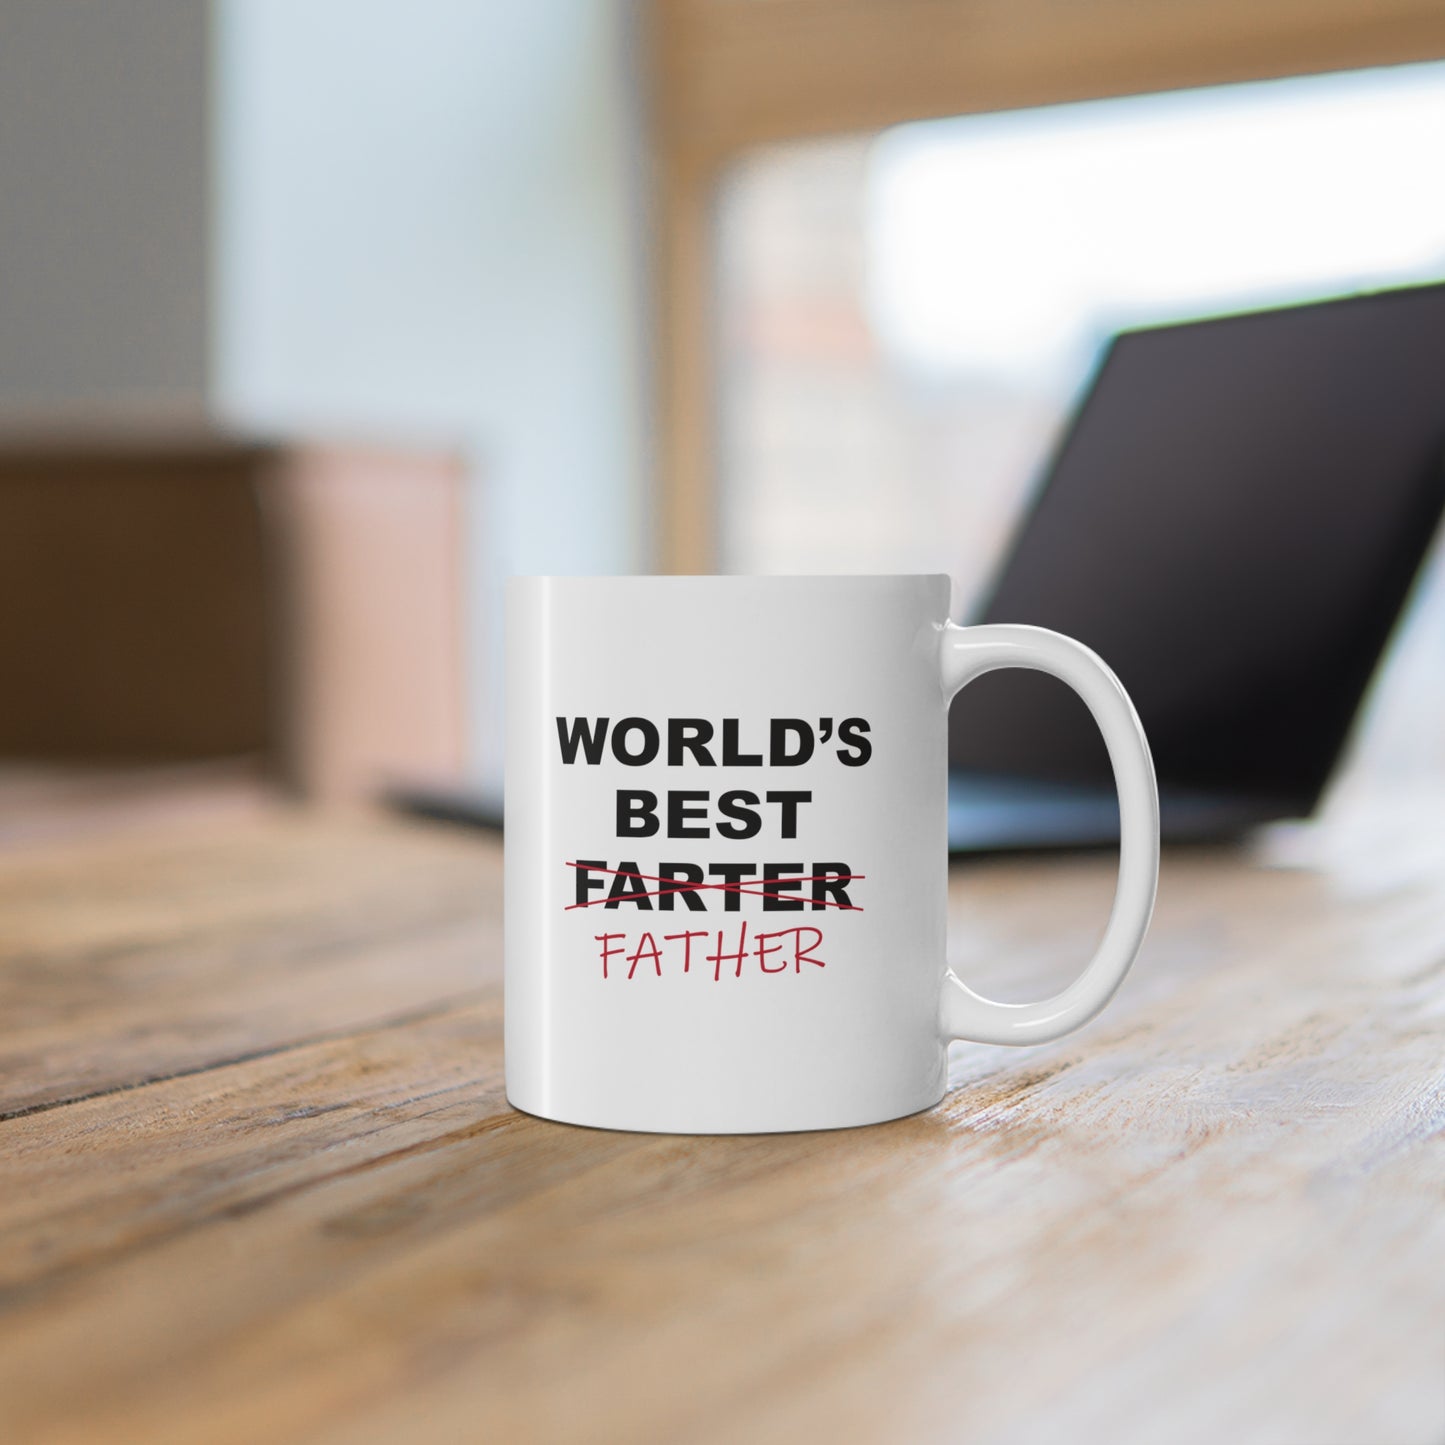 11oz ceramic mug with quote World's best farter father 